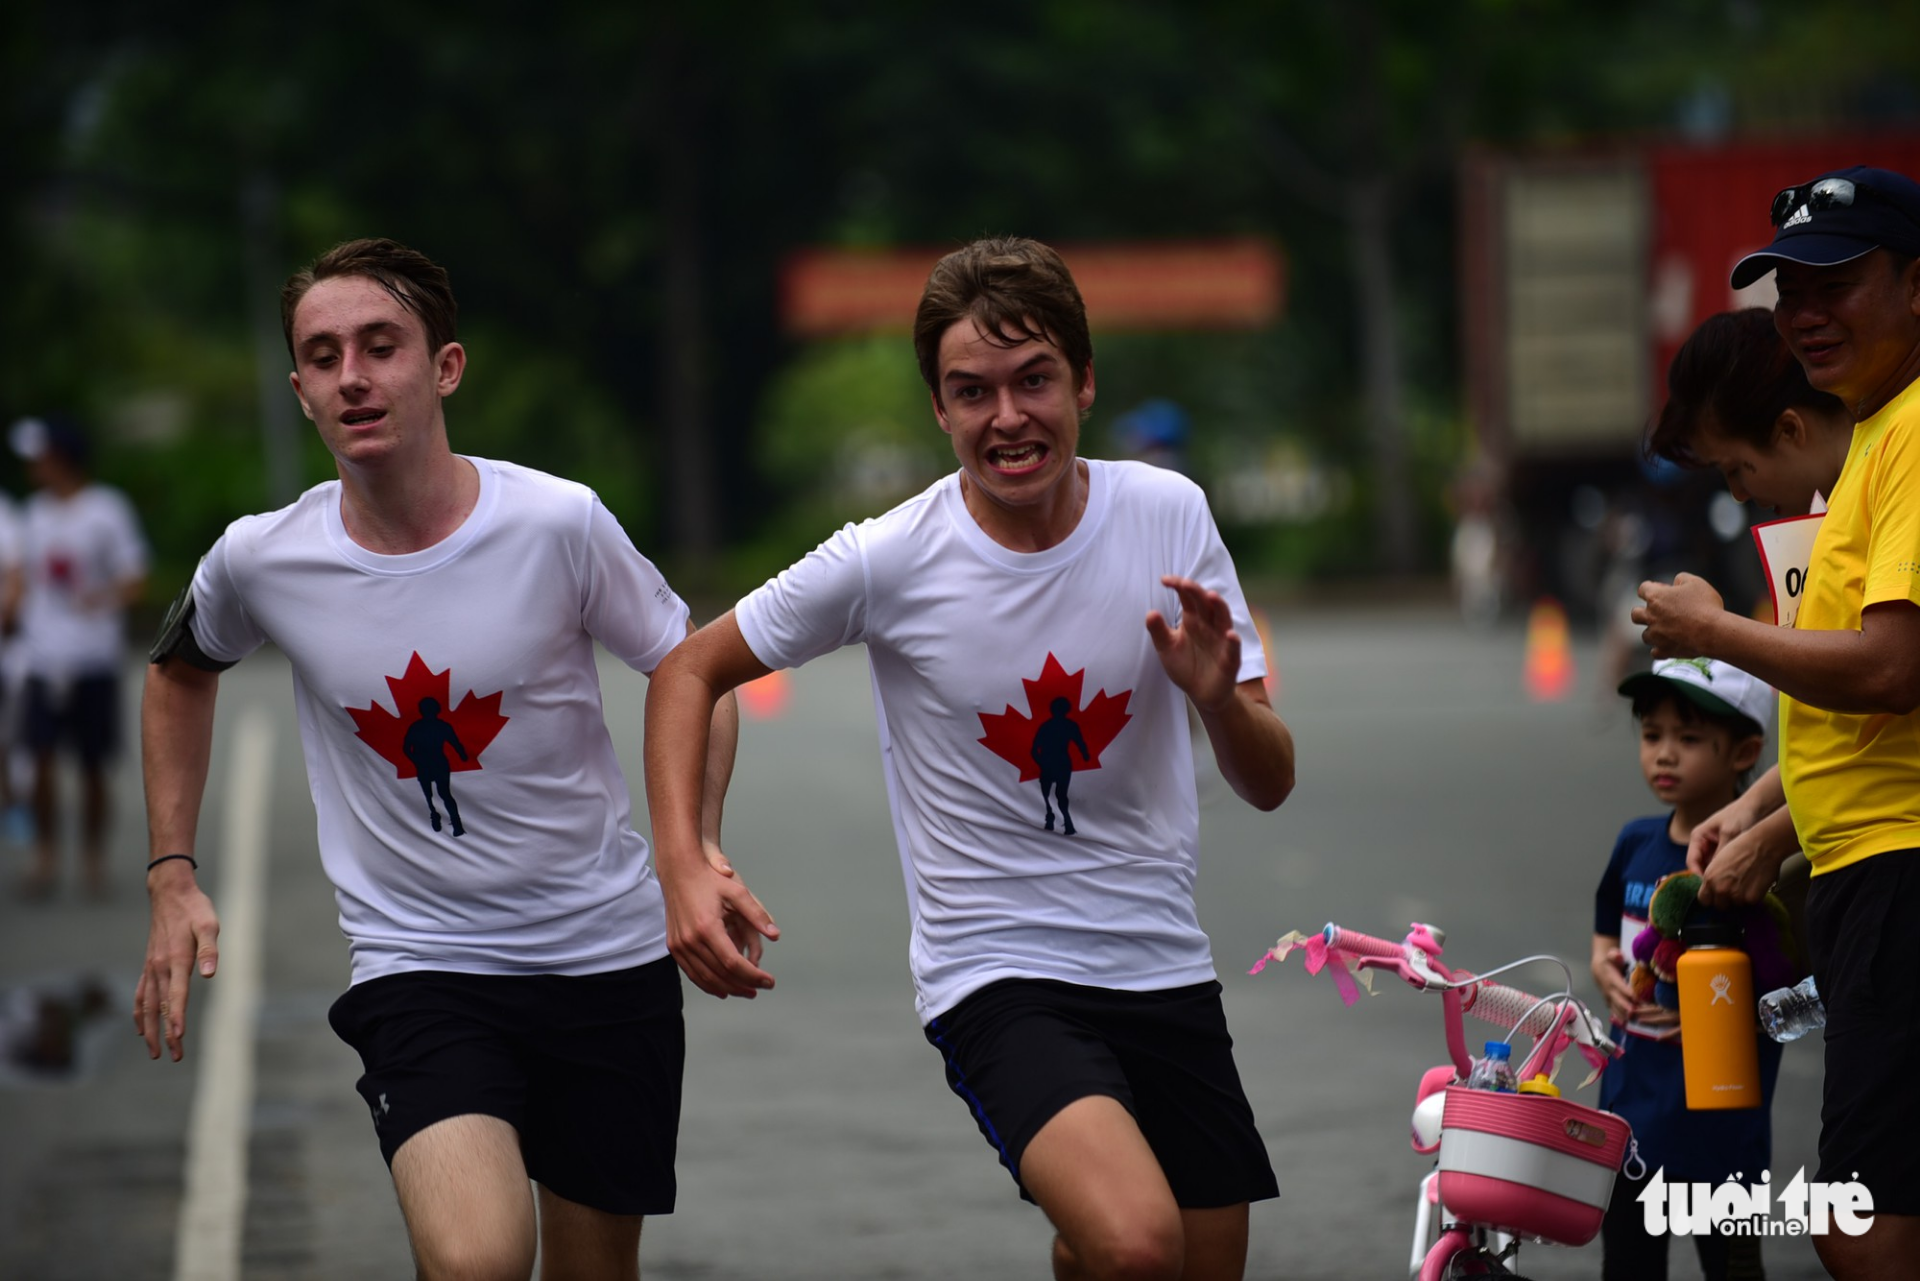 Two foreign runners sprint towards the finish line.